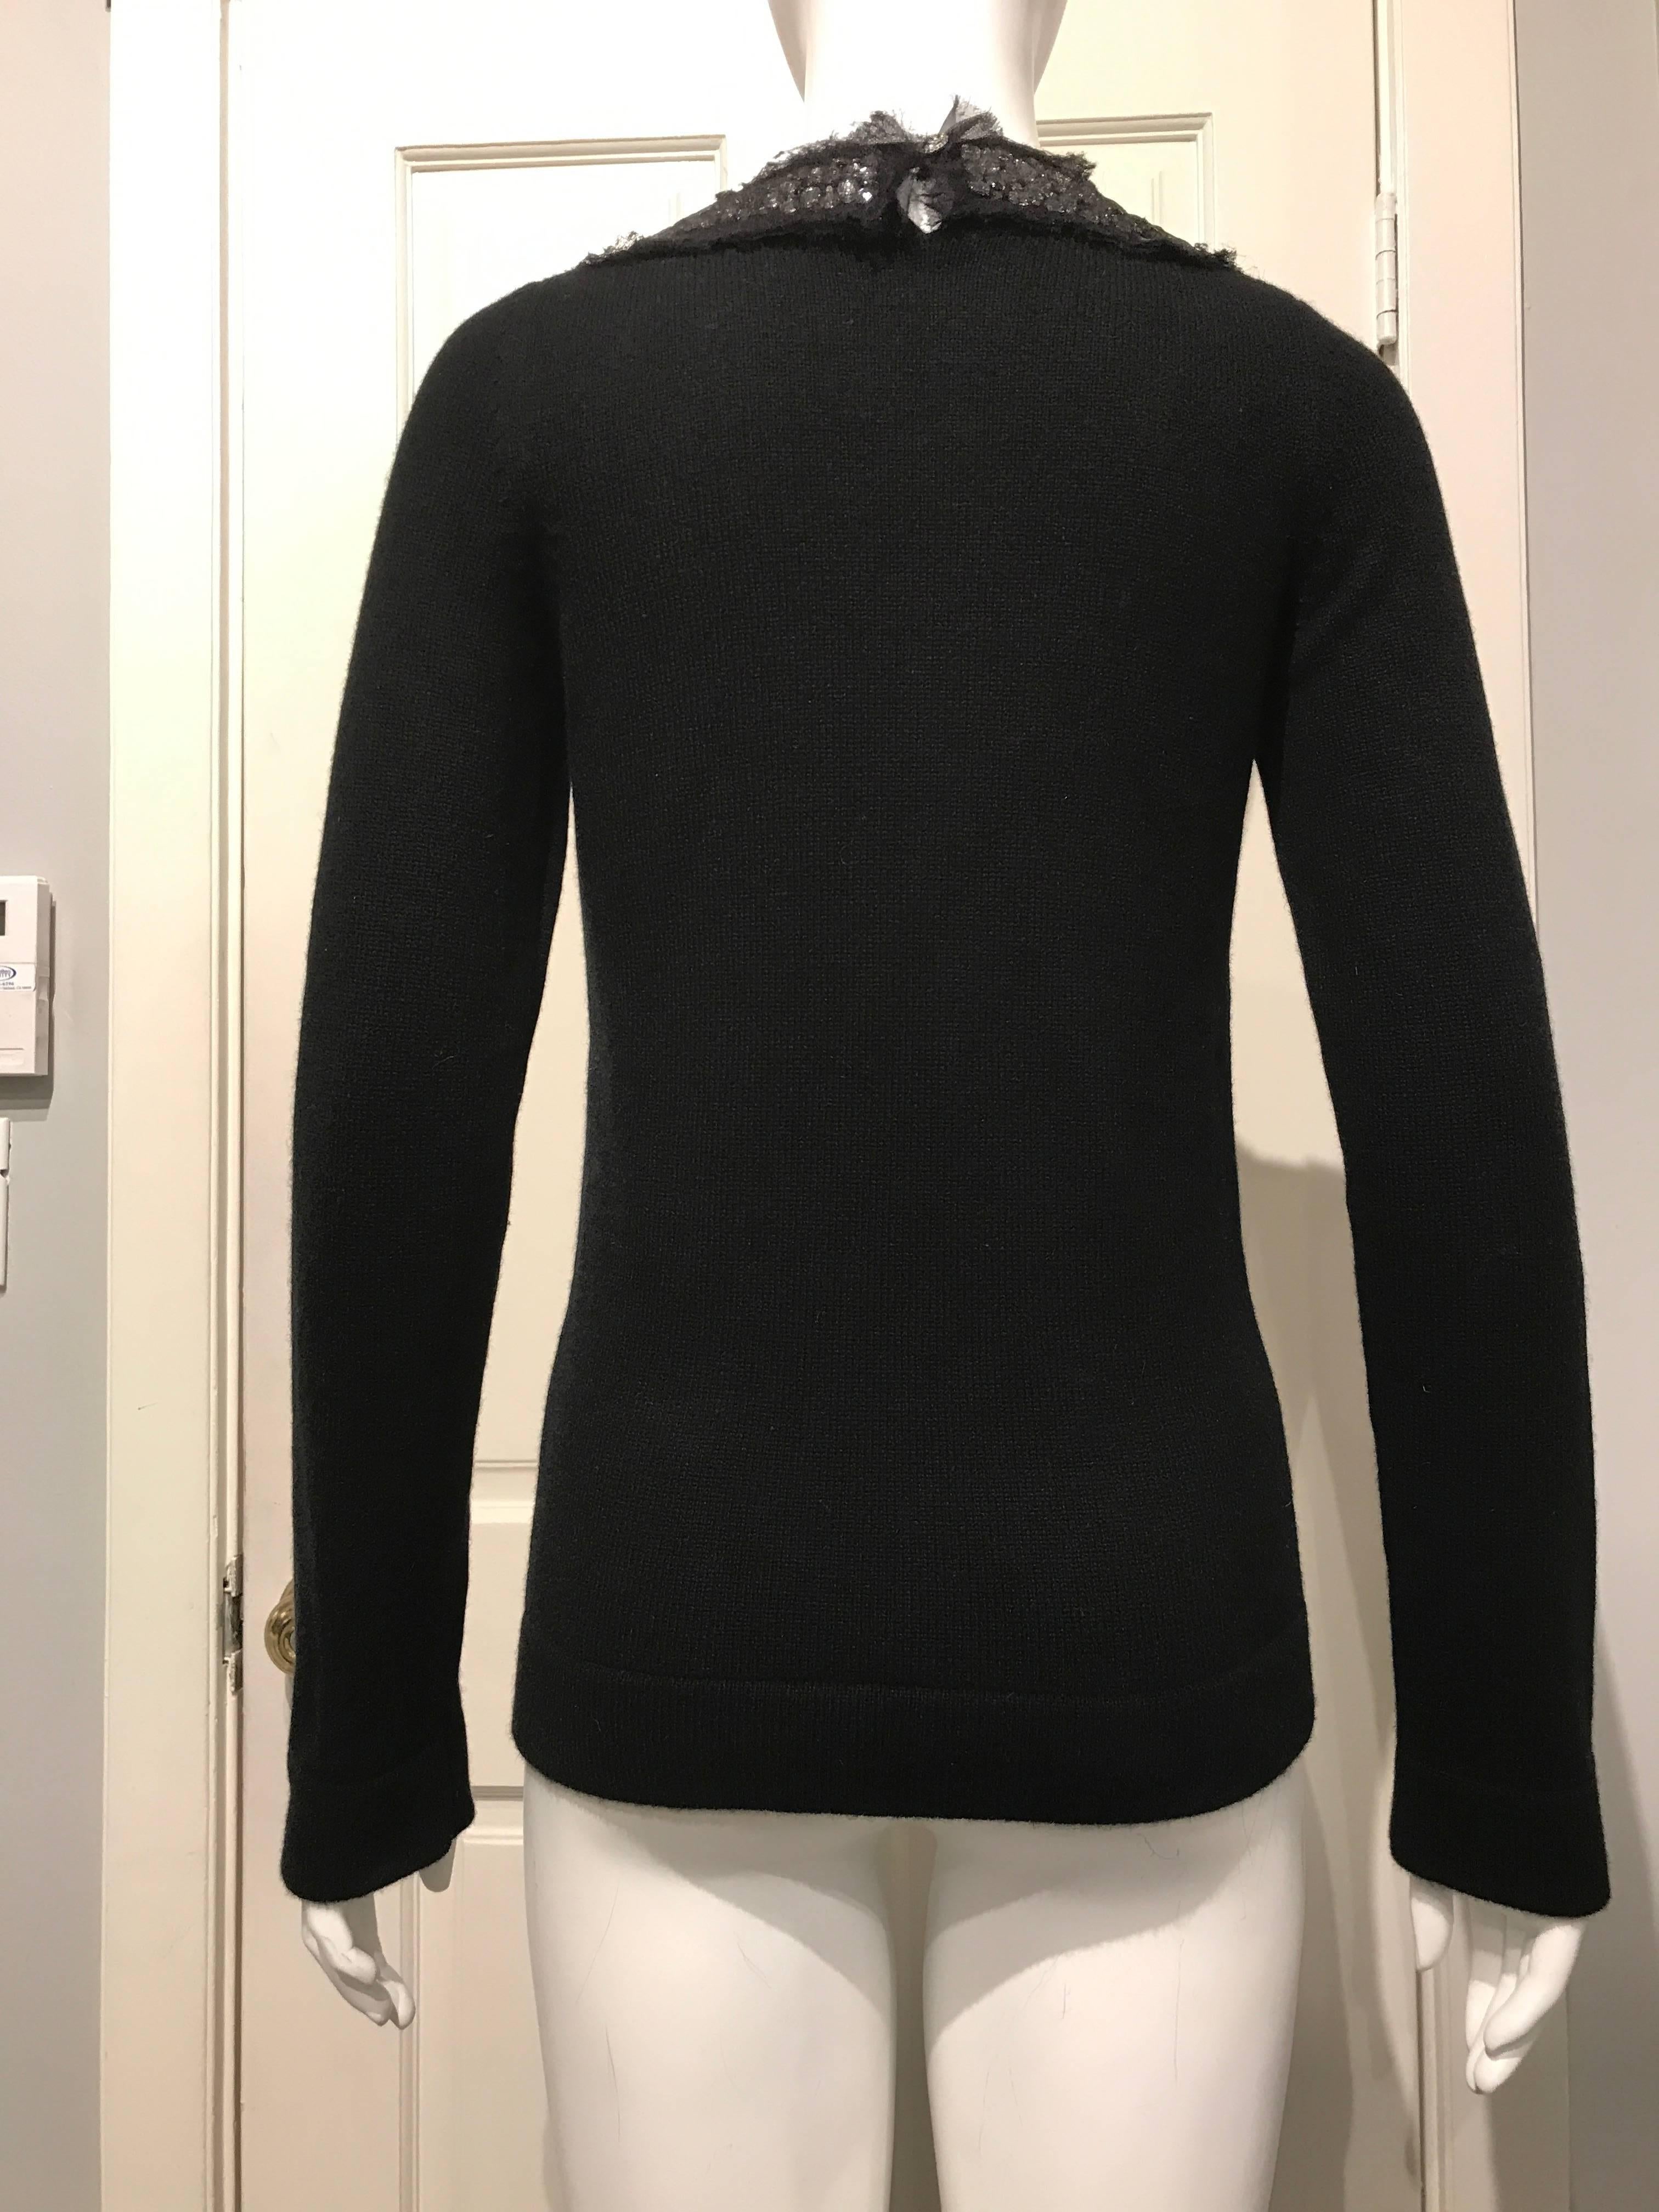 Women's Chanel Black Cashmere Sweater With Jeweled Neckline Sz36 (Us4) For Sale